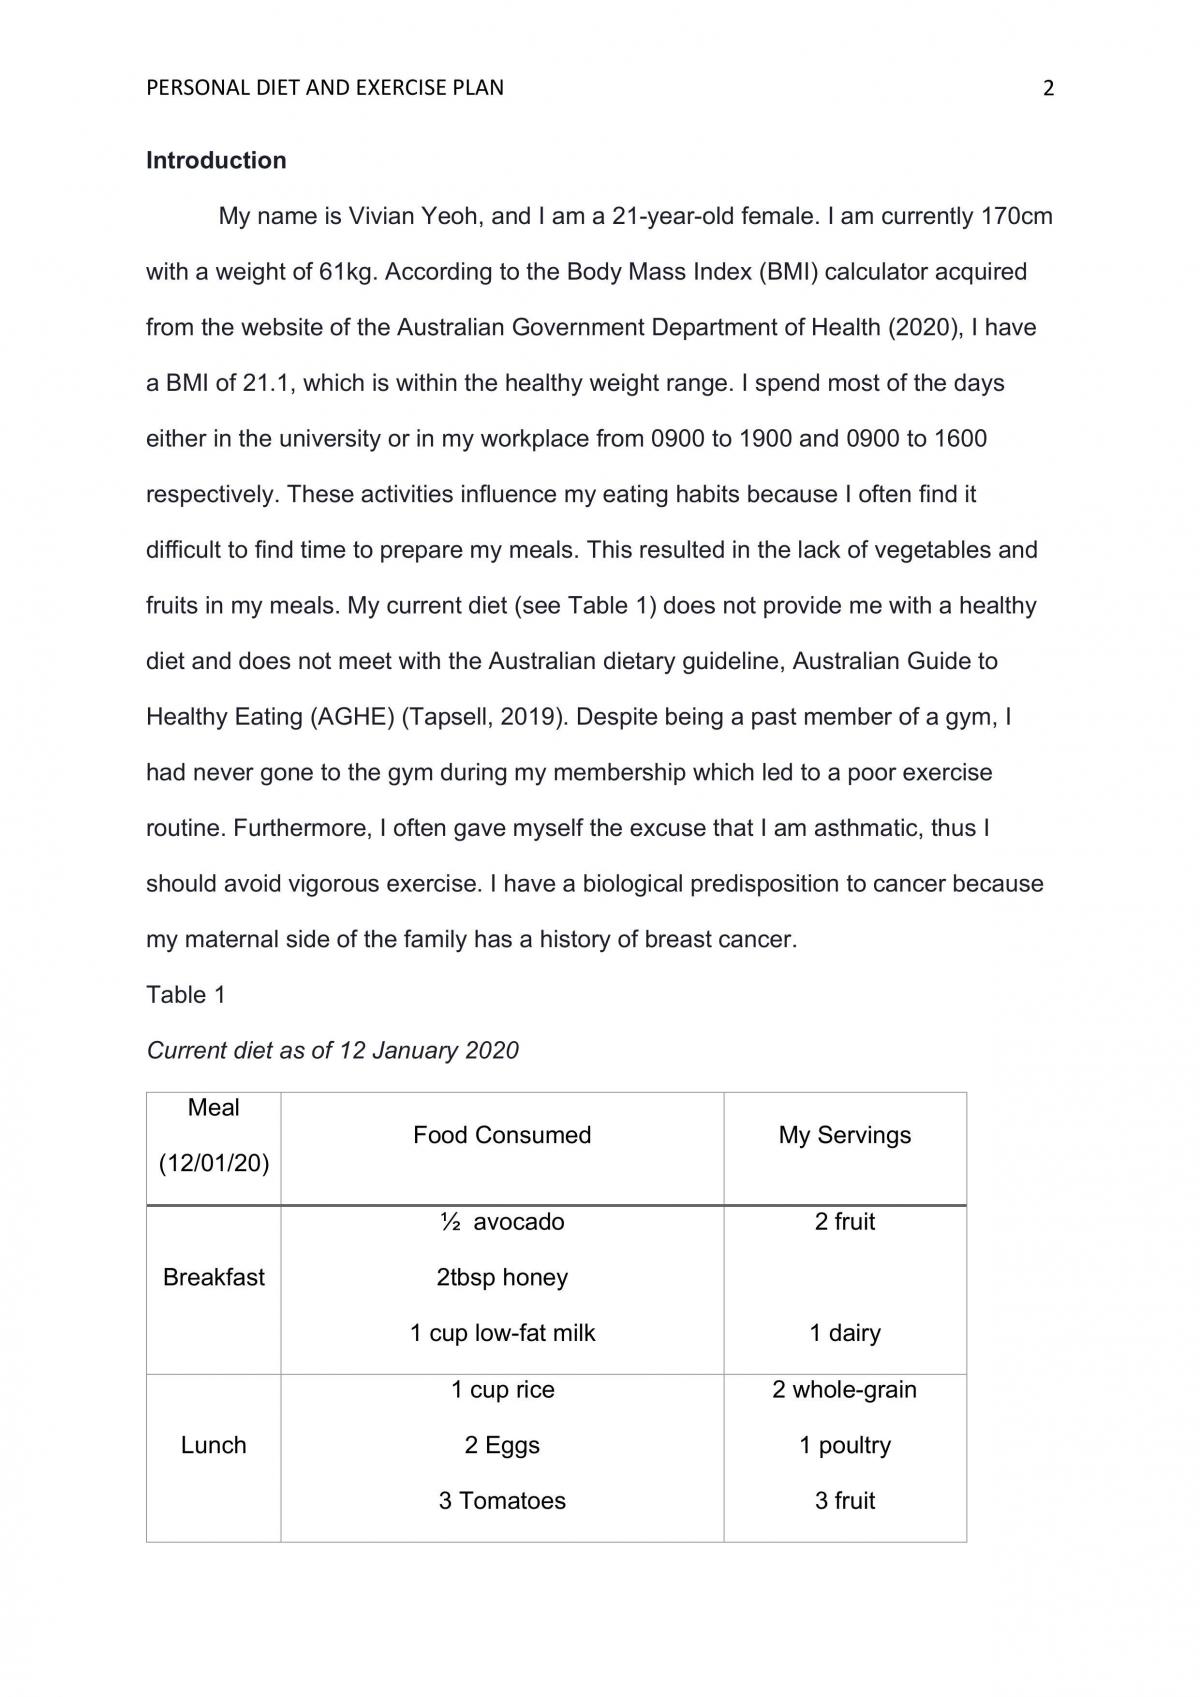 NUTR1023: Personal Diet and Exercise Plan - Page 1